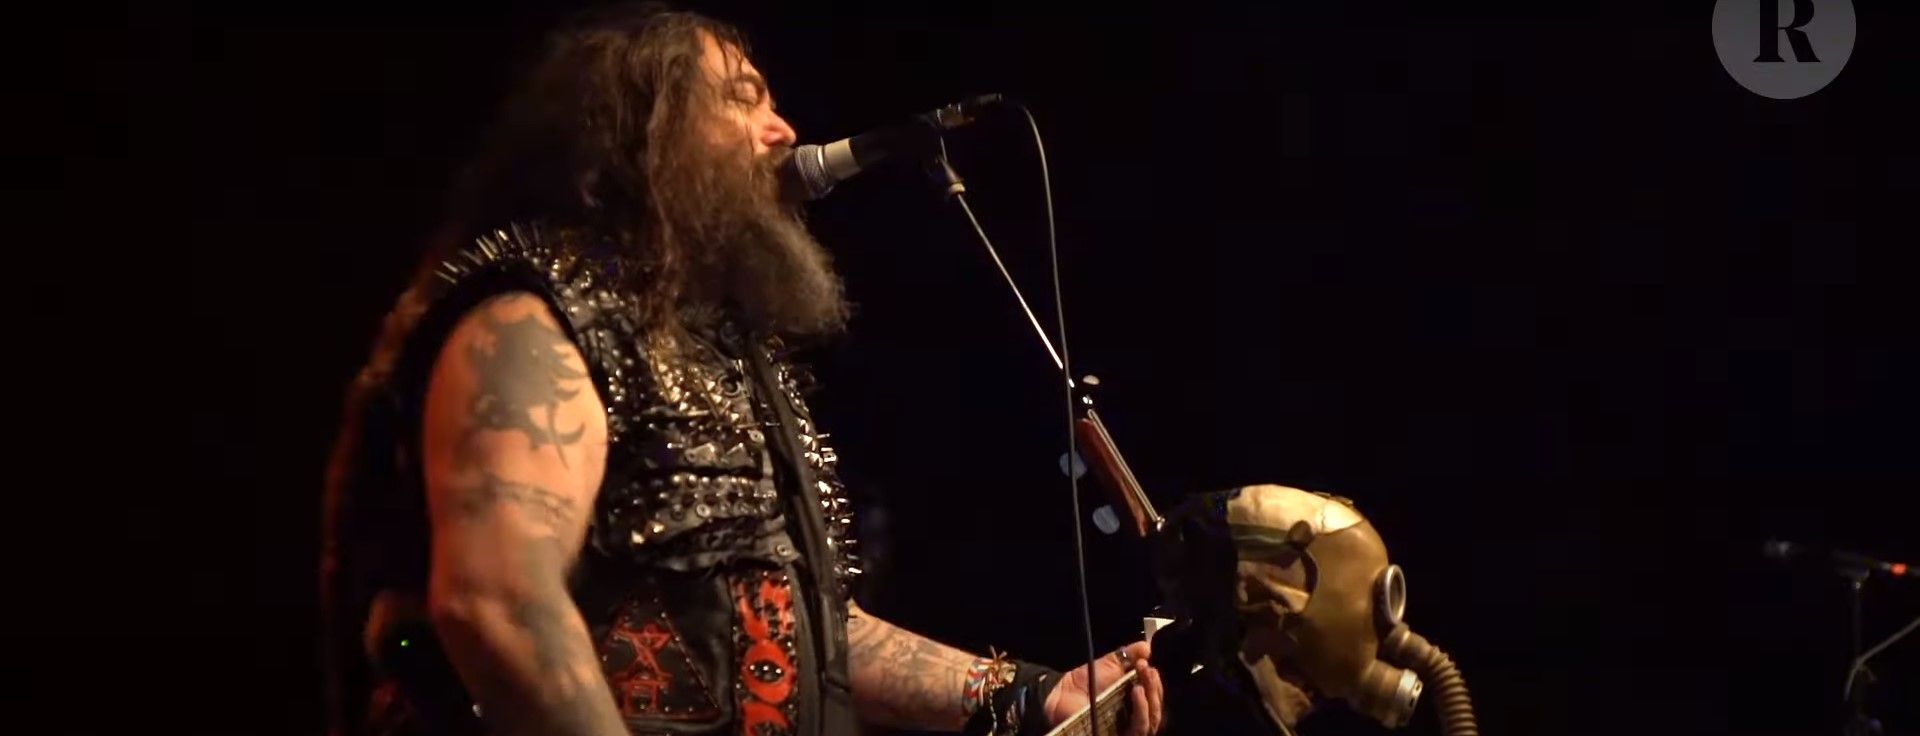 Soulfly - Under Rapture (Live In NYC 2019)